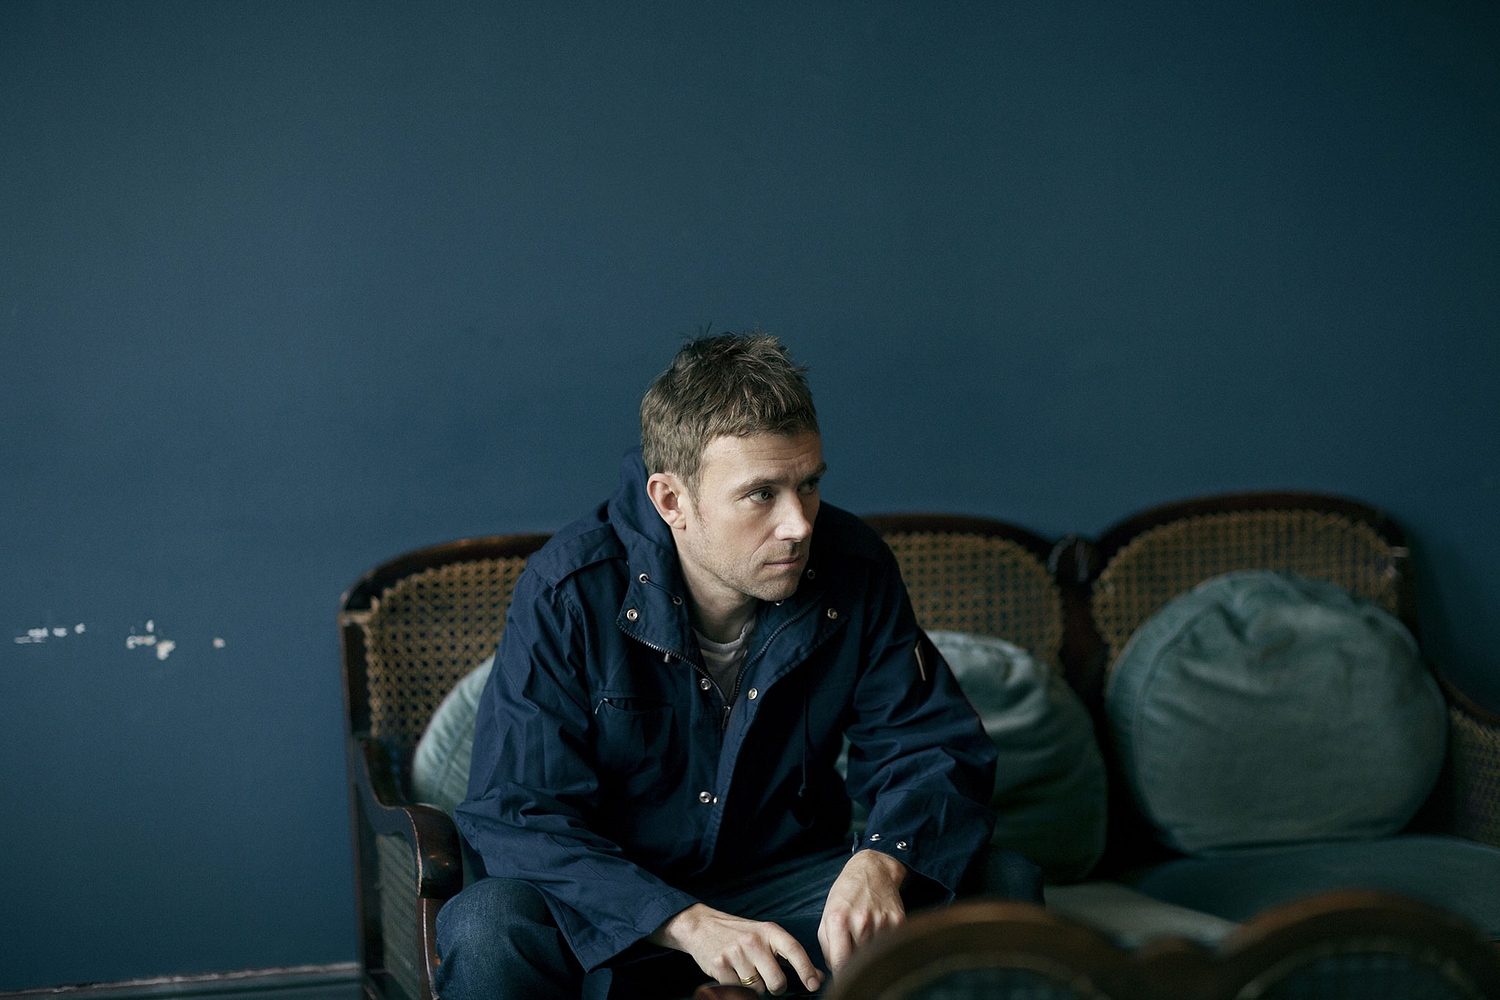 Damon Albarn on Latitude 2014 special guest: "I only know so many people”